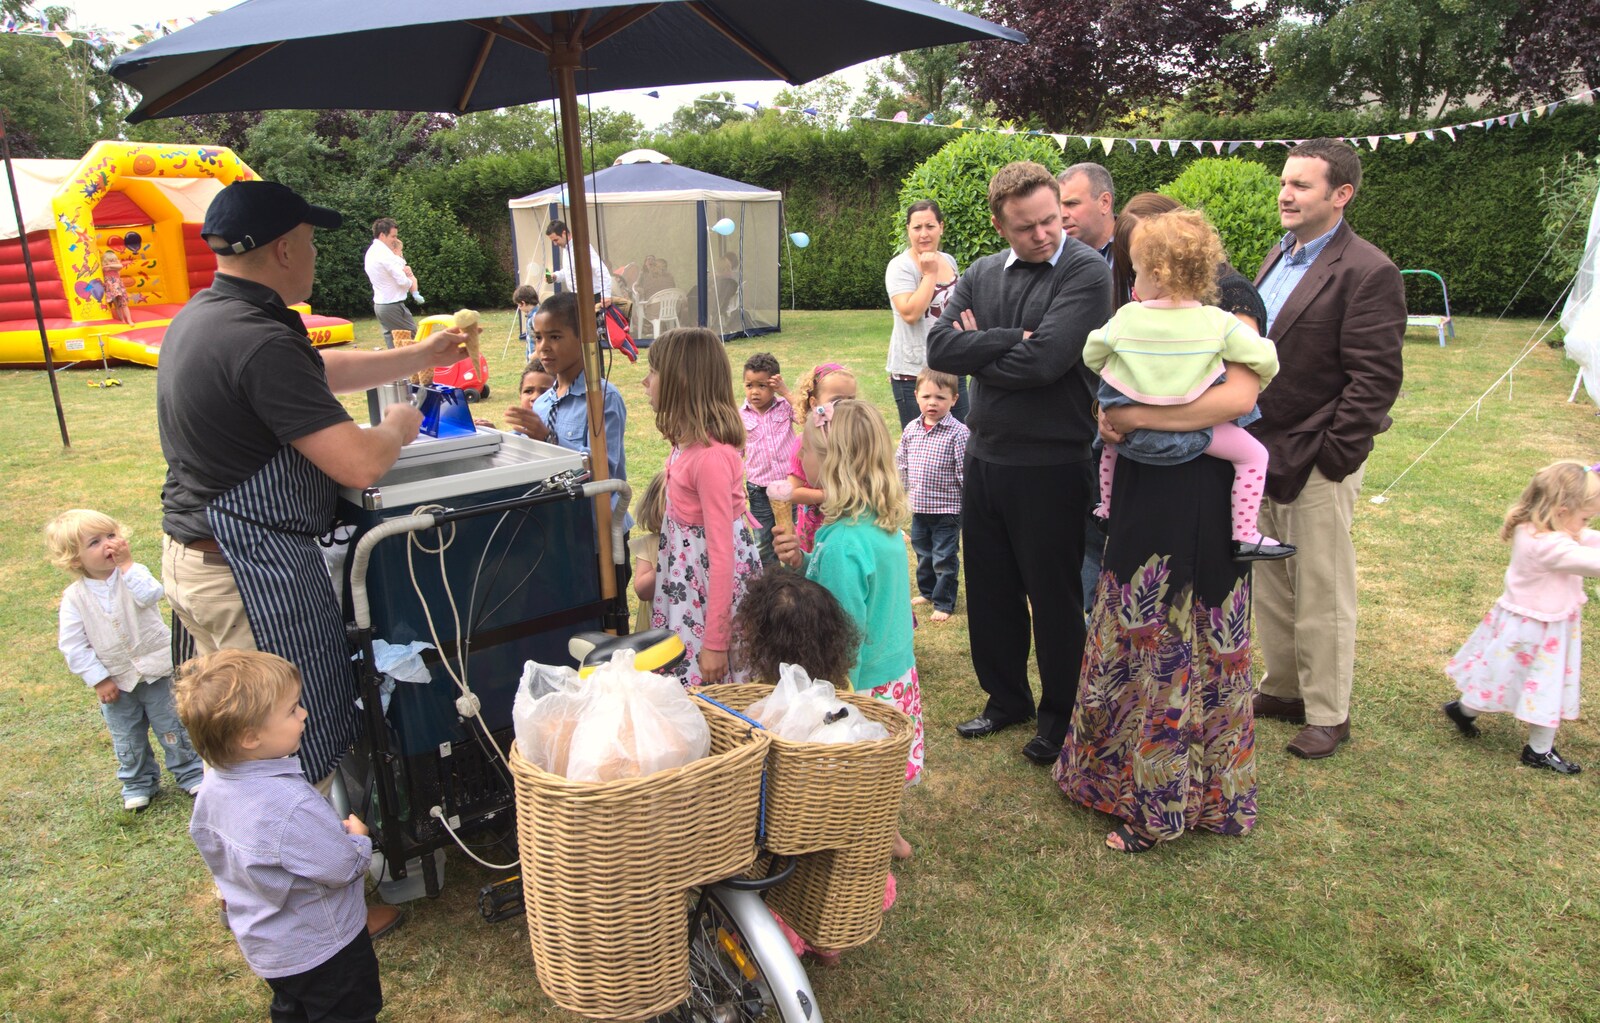 The ice-cream man turns up from A Christening at St. Mary's Church, Wortham, Suffolk - 12th June 2011